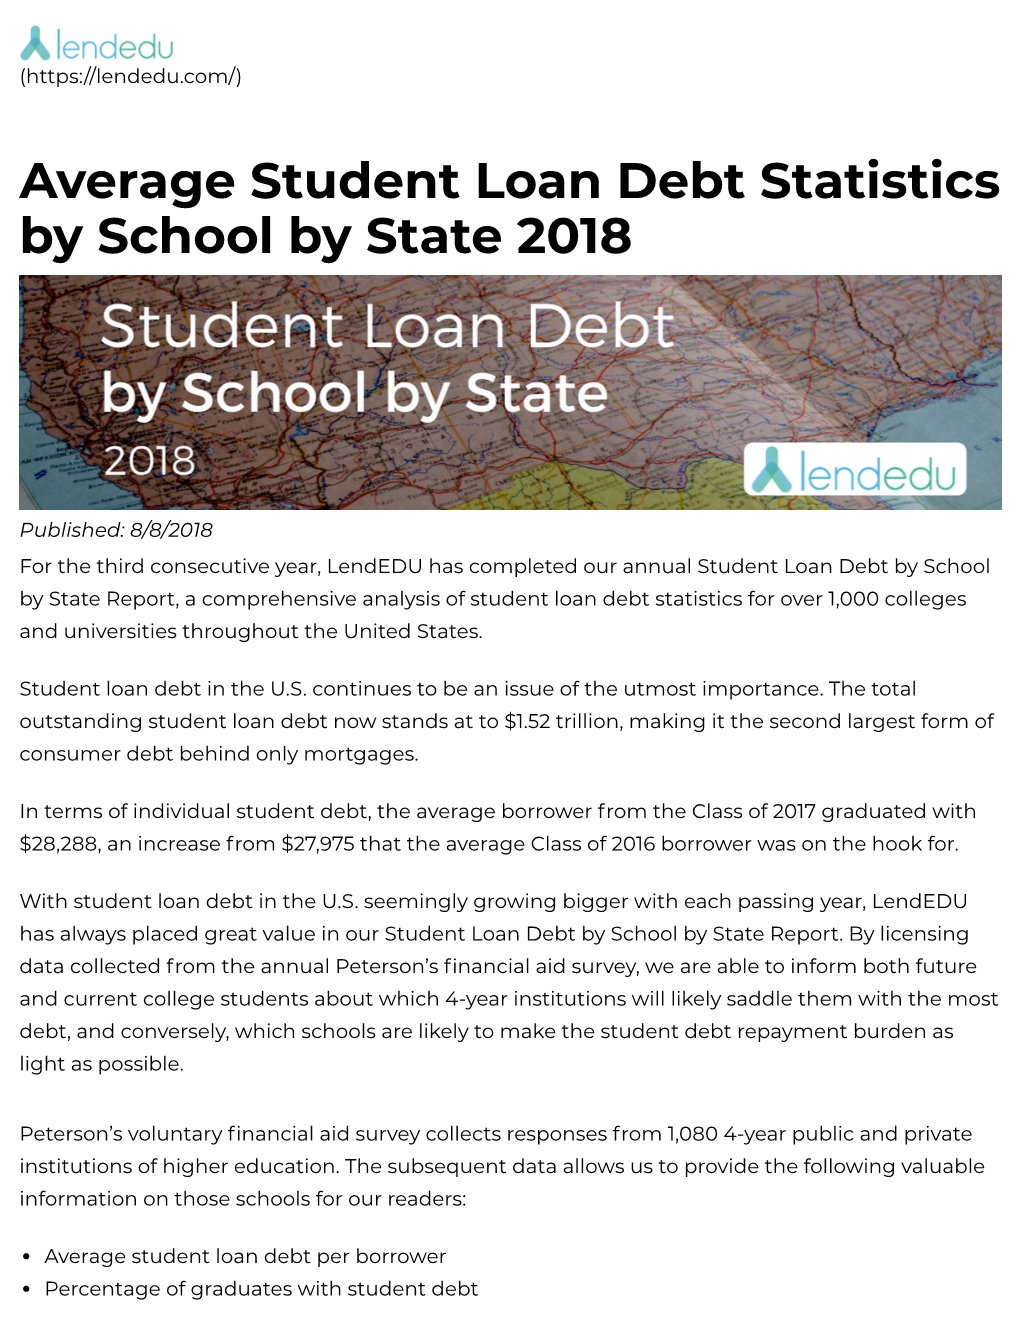 Student Loan Debt by School by State 2018